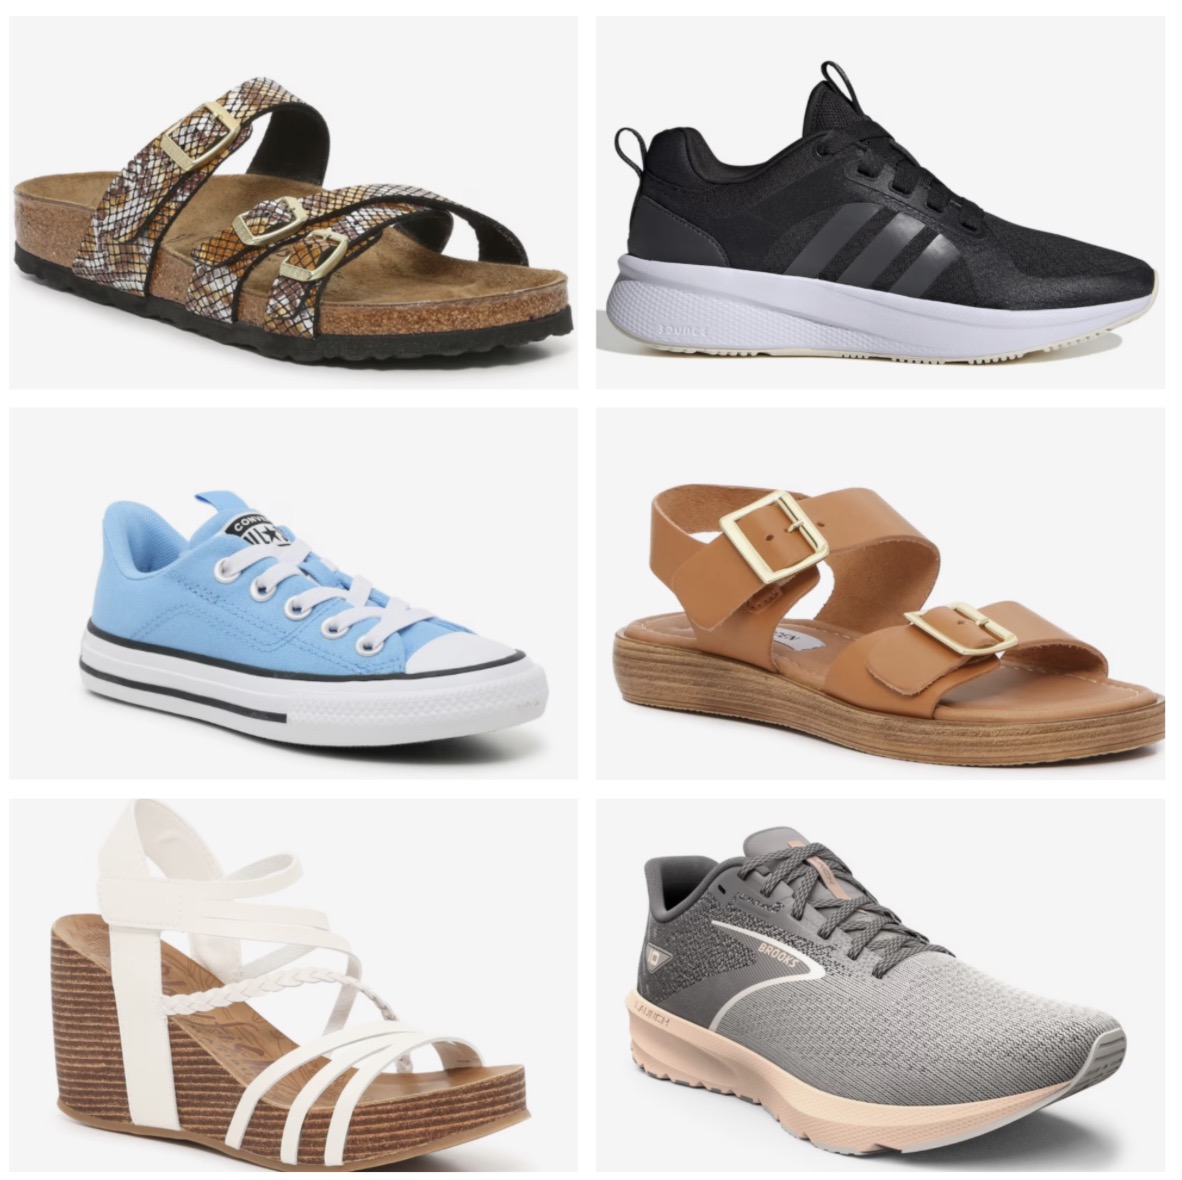 *HOT* DSW: Additional 30% off Sale Sneakers + Free Transport!